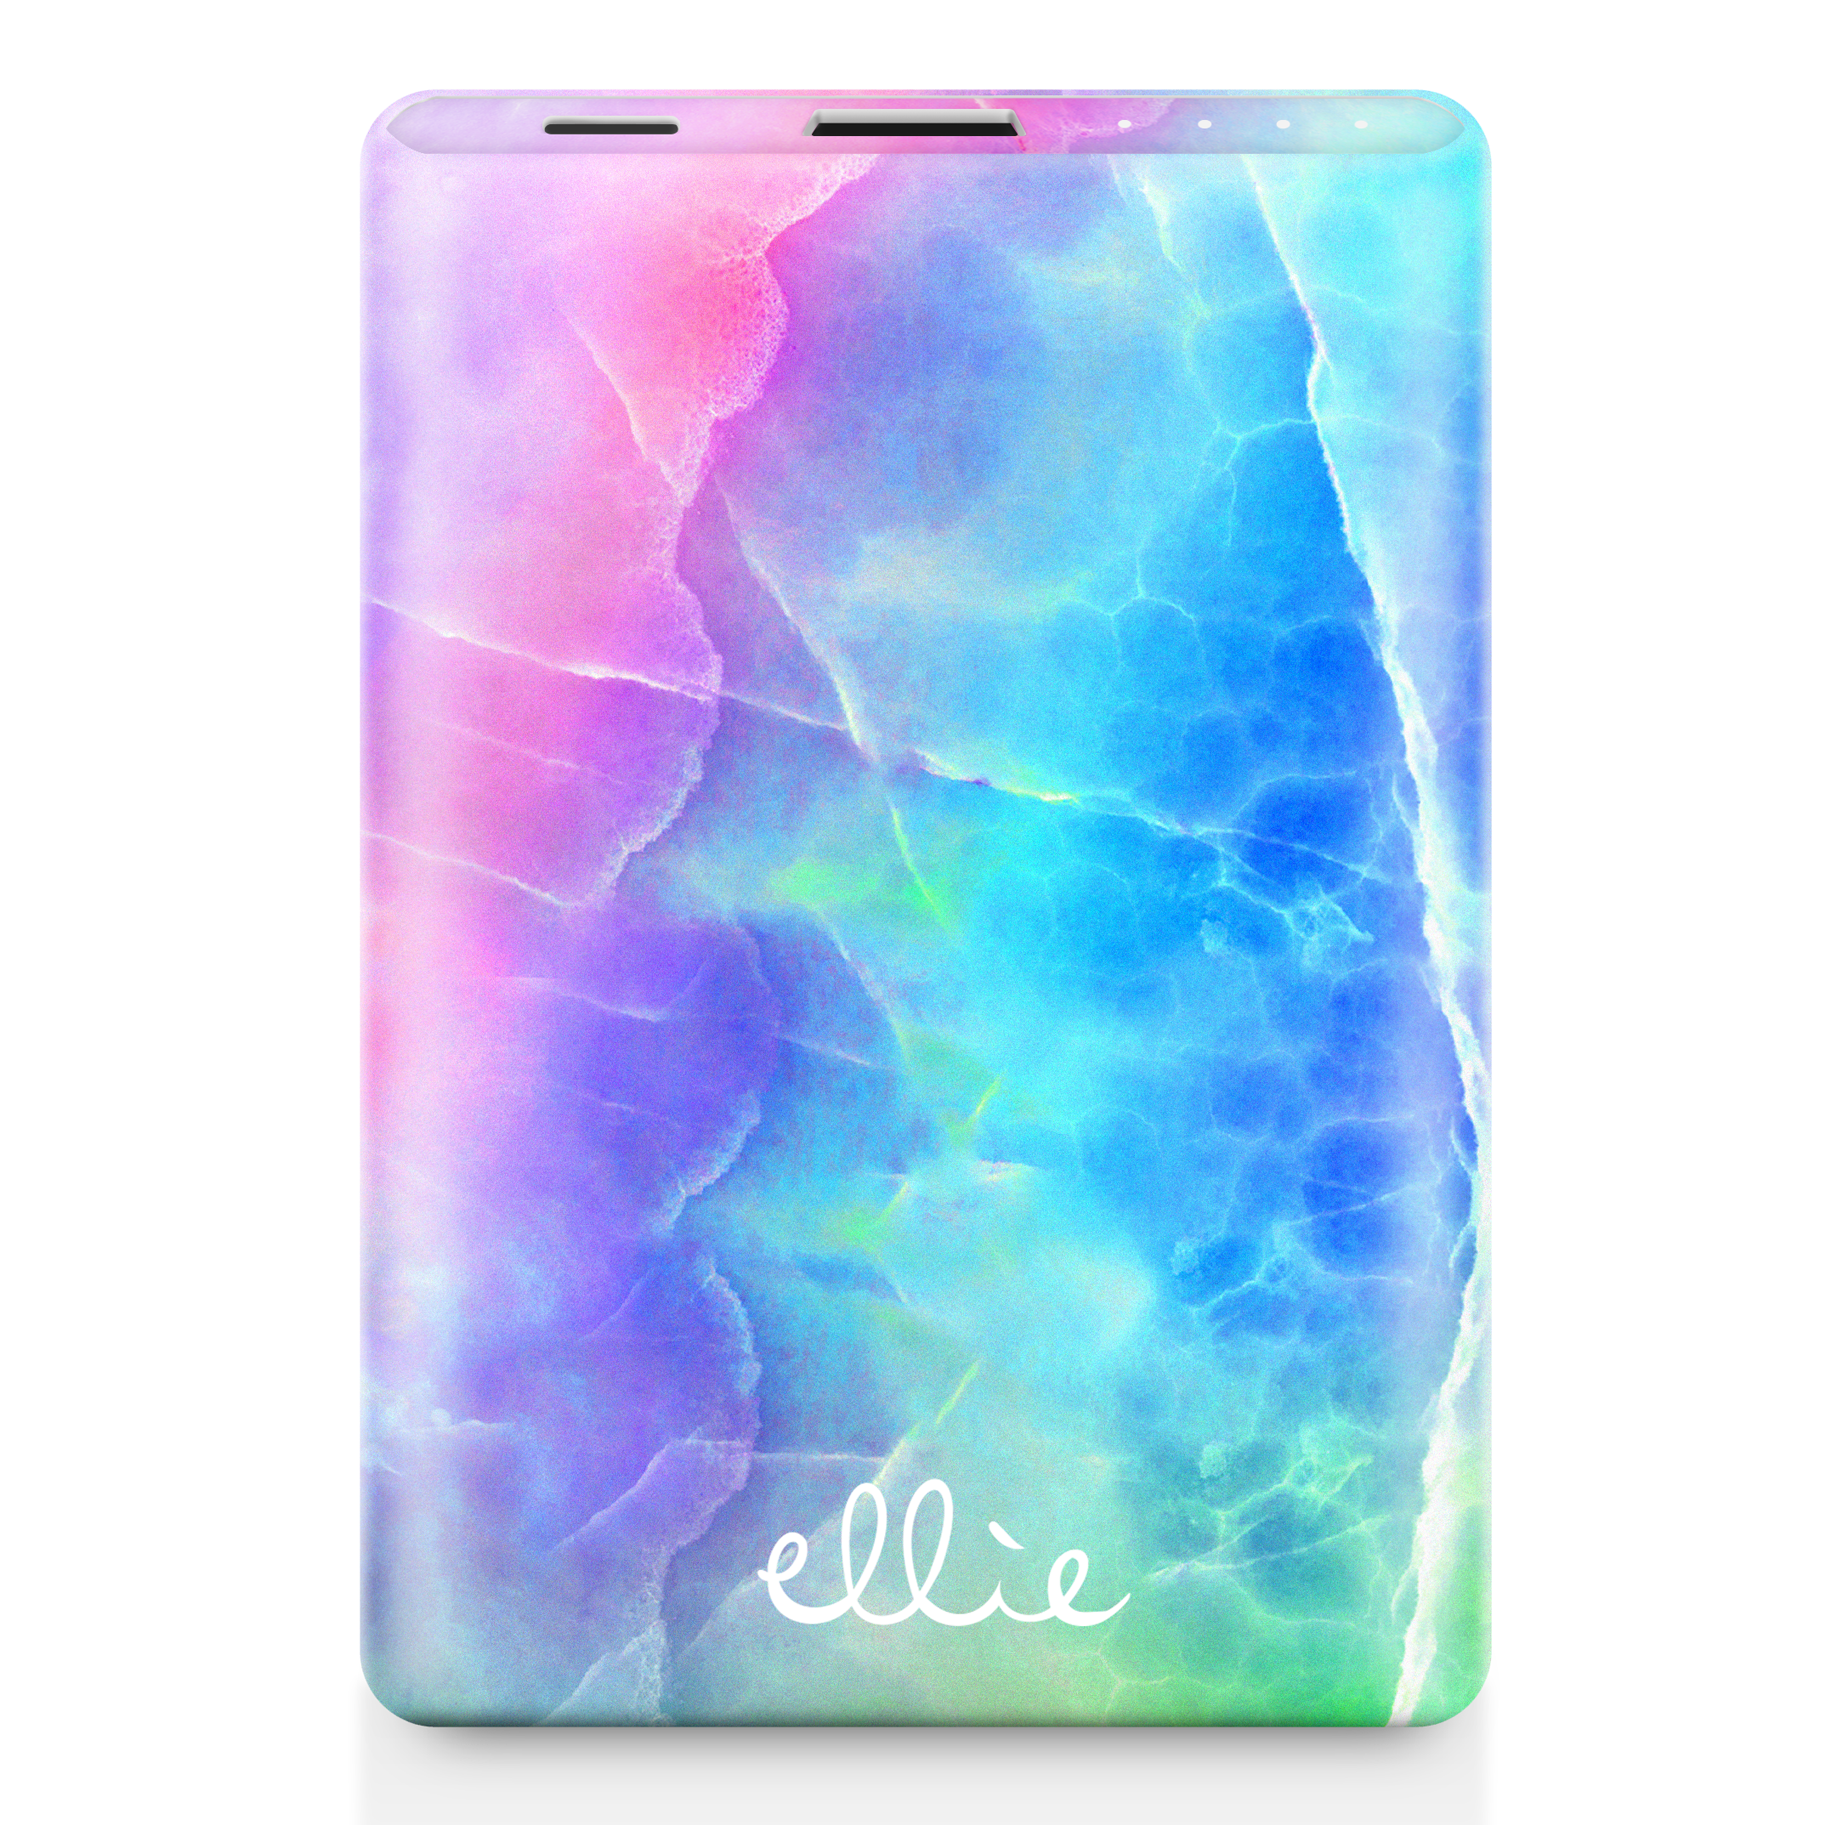 K122 Power Bank Charger - Rainbow Marble